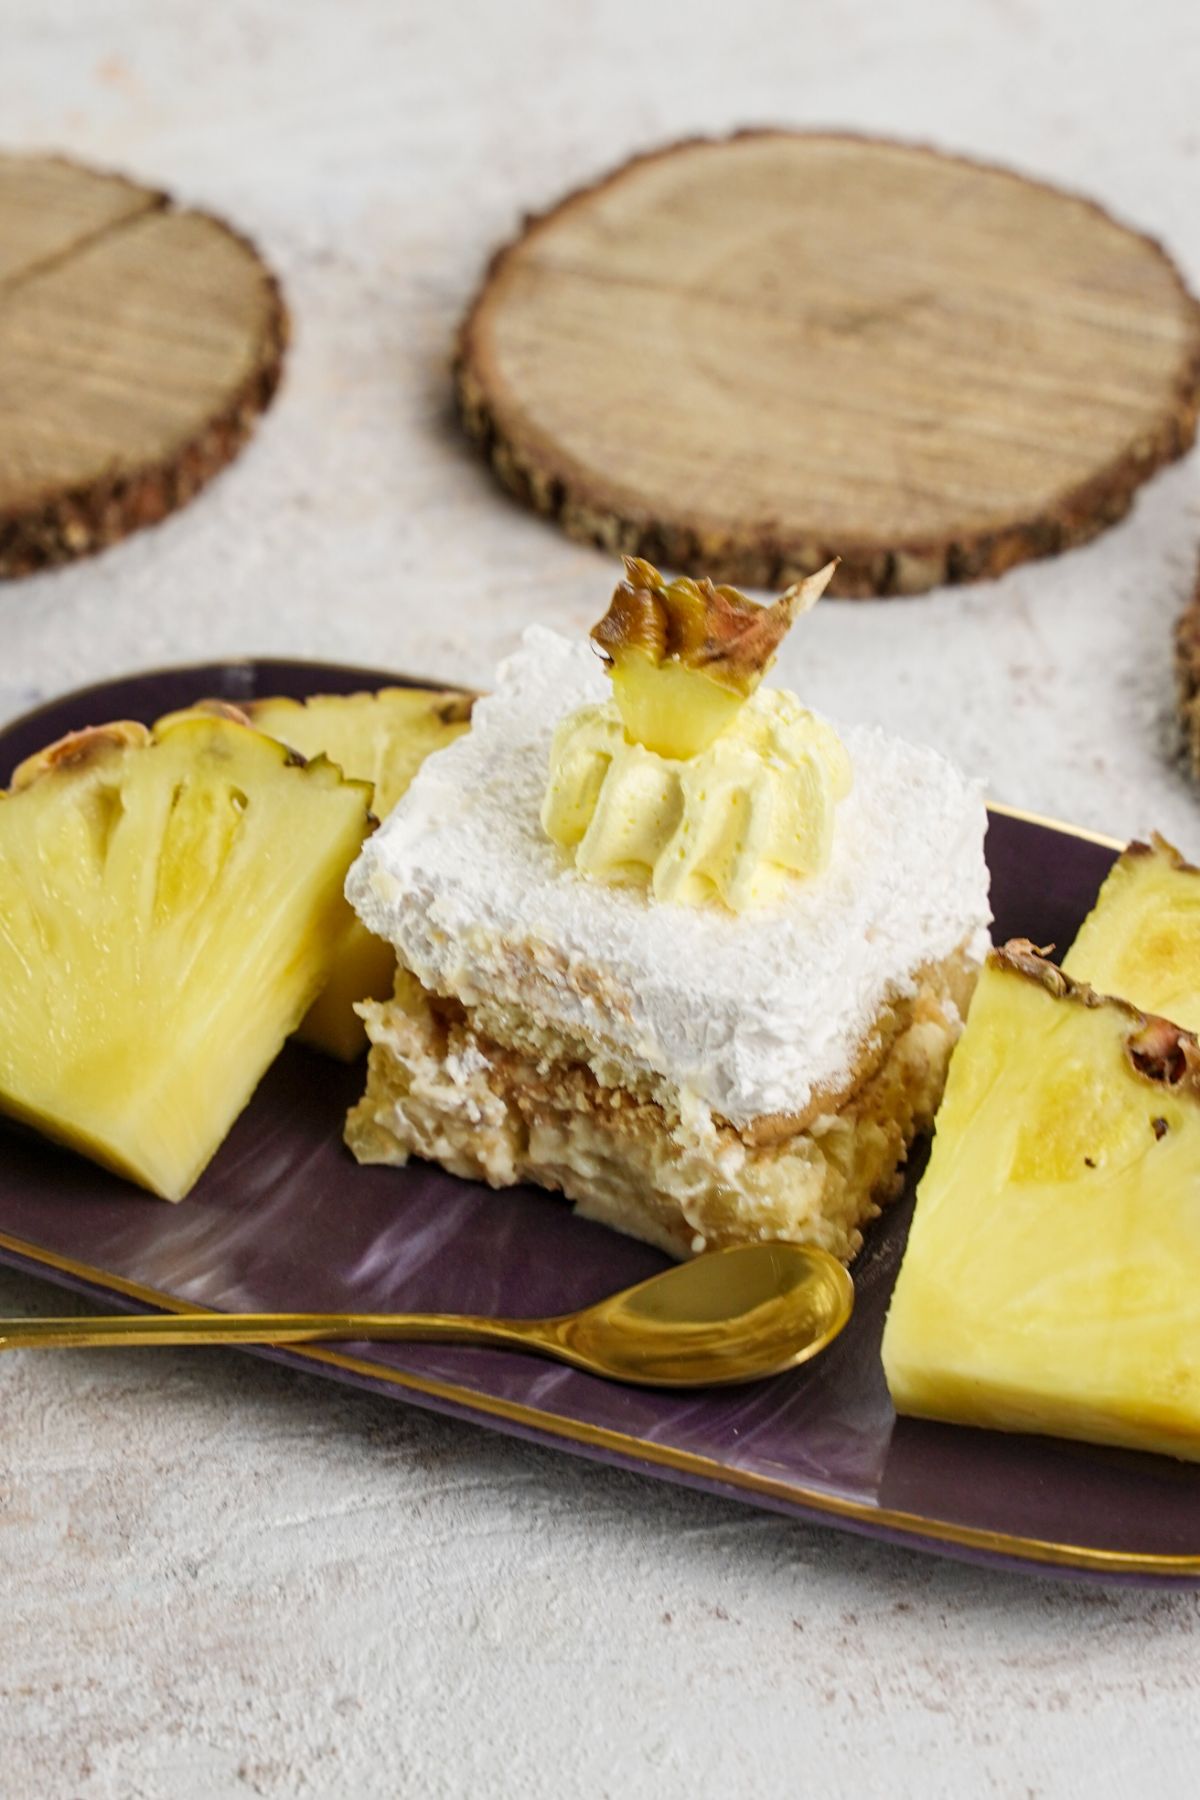 italian cream cake slice on platter with sliced pineapple on white table by wood slices